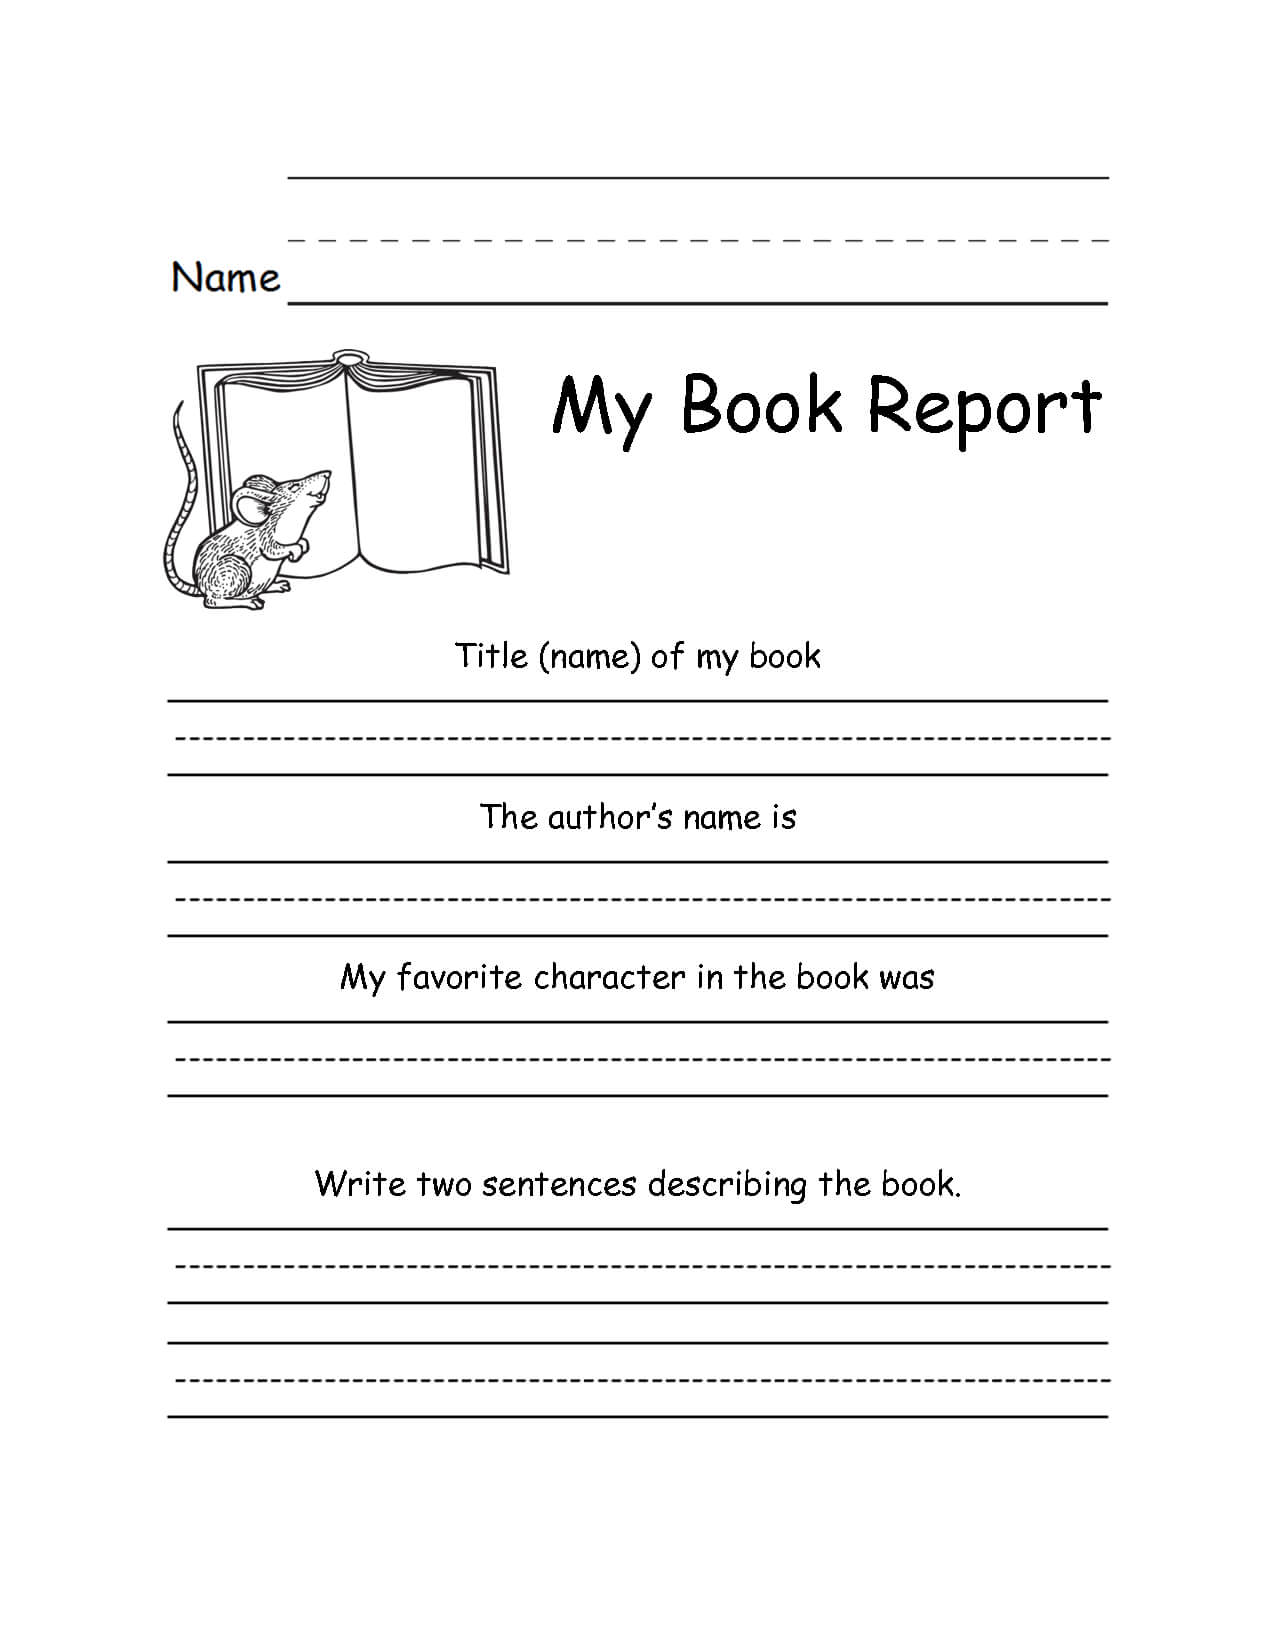 3rd grade research paper template